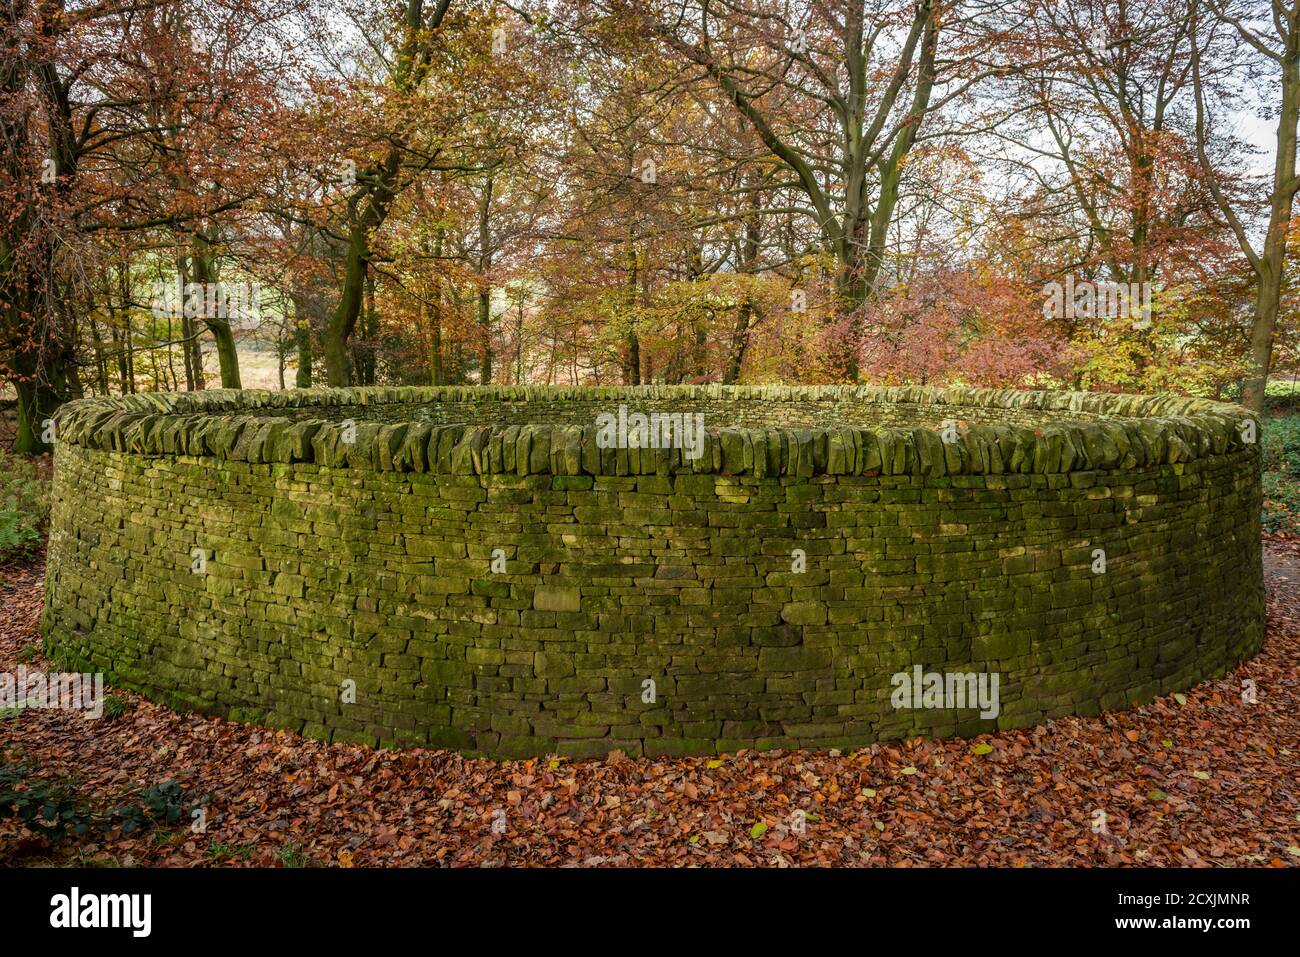 Artist Andy Goldsworthy's environmental sculpture 'Outclosure' at the Yorkshire Sculpture Park near Wakefield, Yorkshire, UK Stock Photo